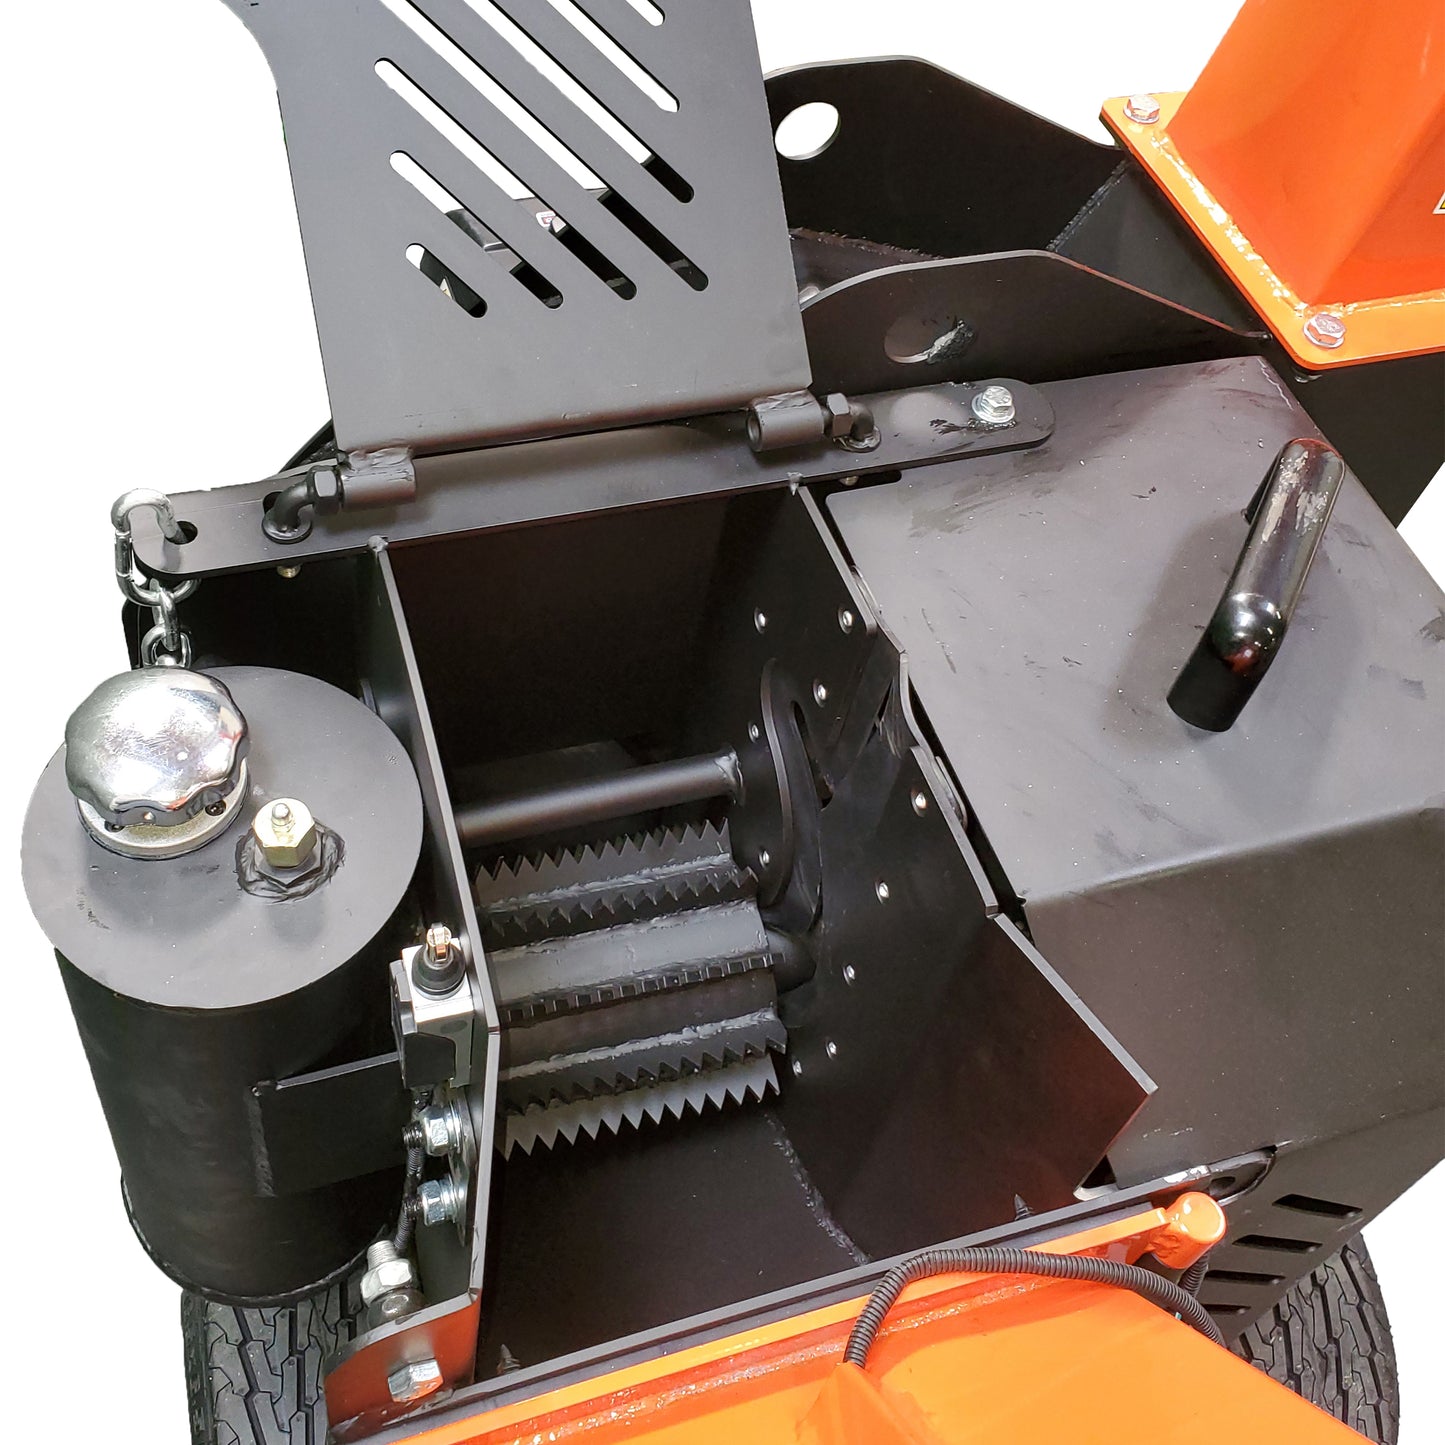 Detail K2 5 Inch 14 HP Chipper with Electric Starter - OPC505AE-Wood Splitter Outlet